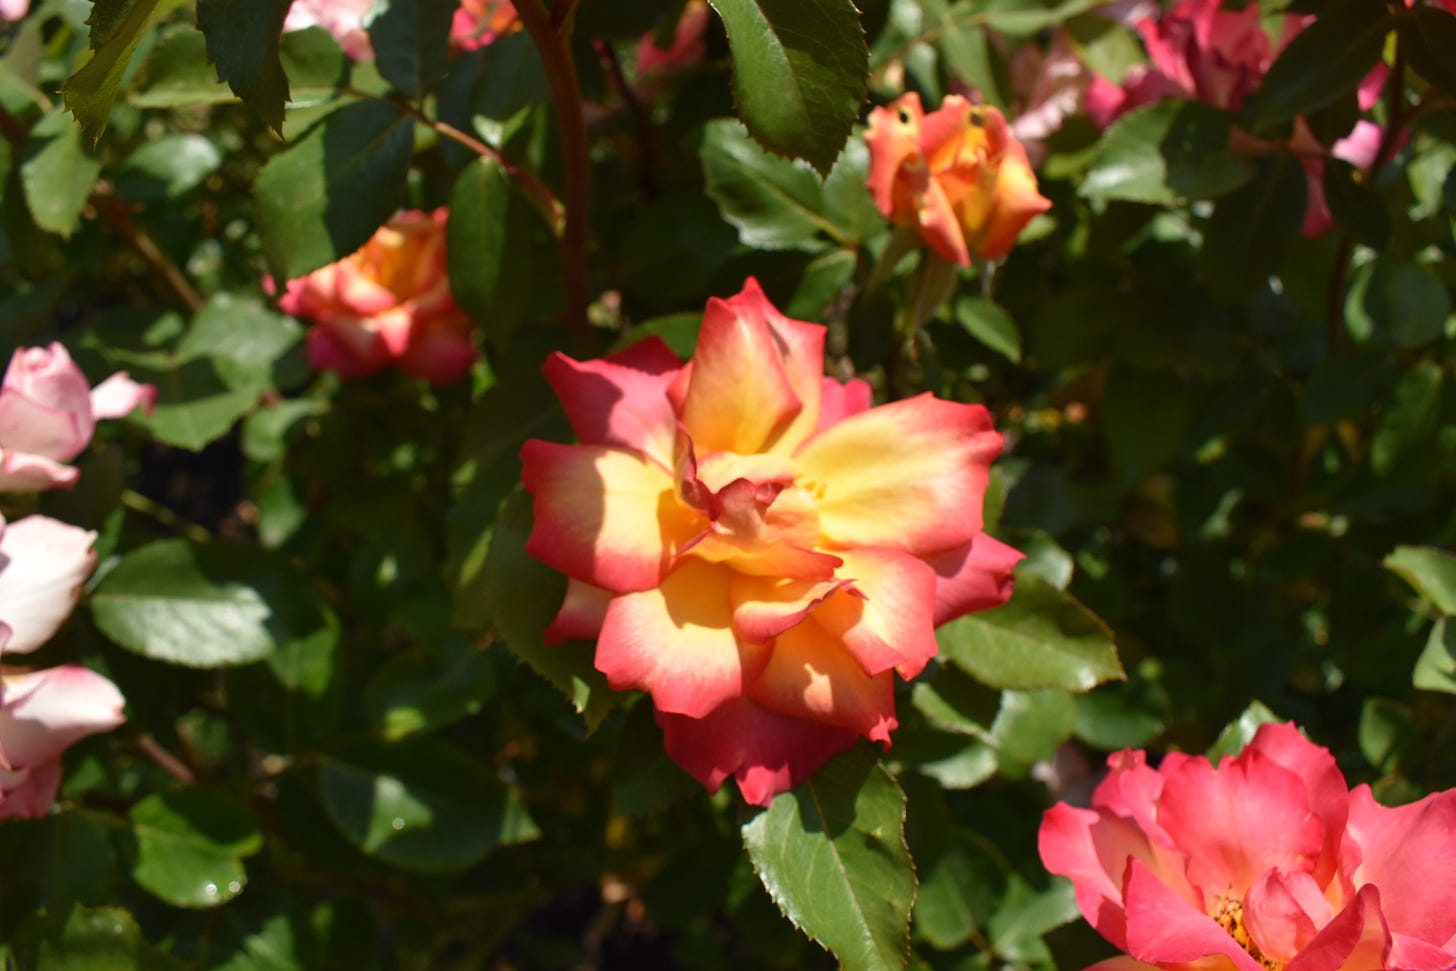 A peachy-yellow-red rose, close-up